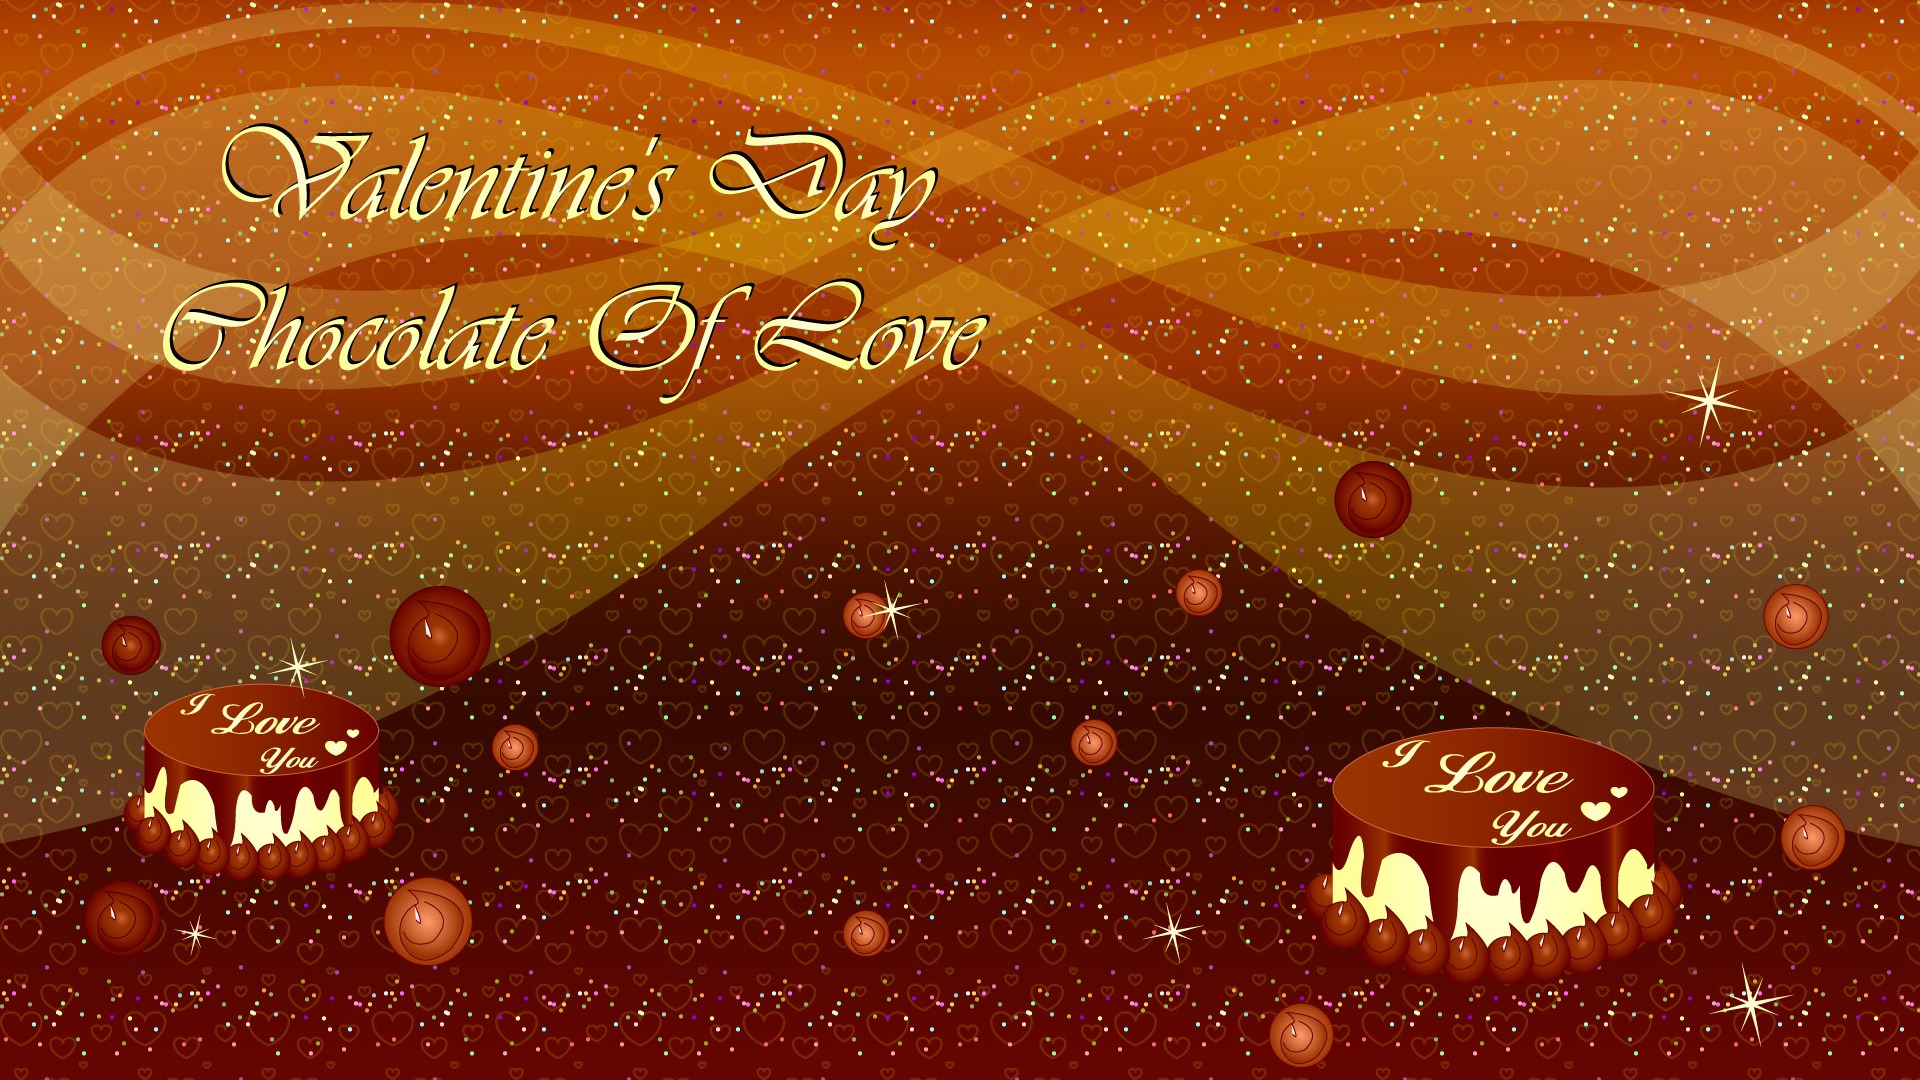 Valentine's Day Theme Wallpapers (2) #4 - 1920x1080